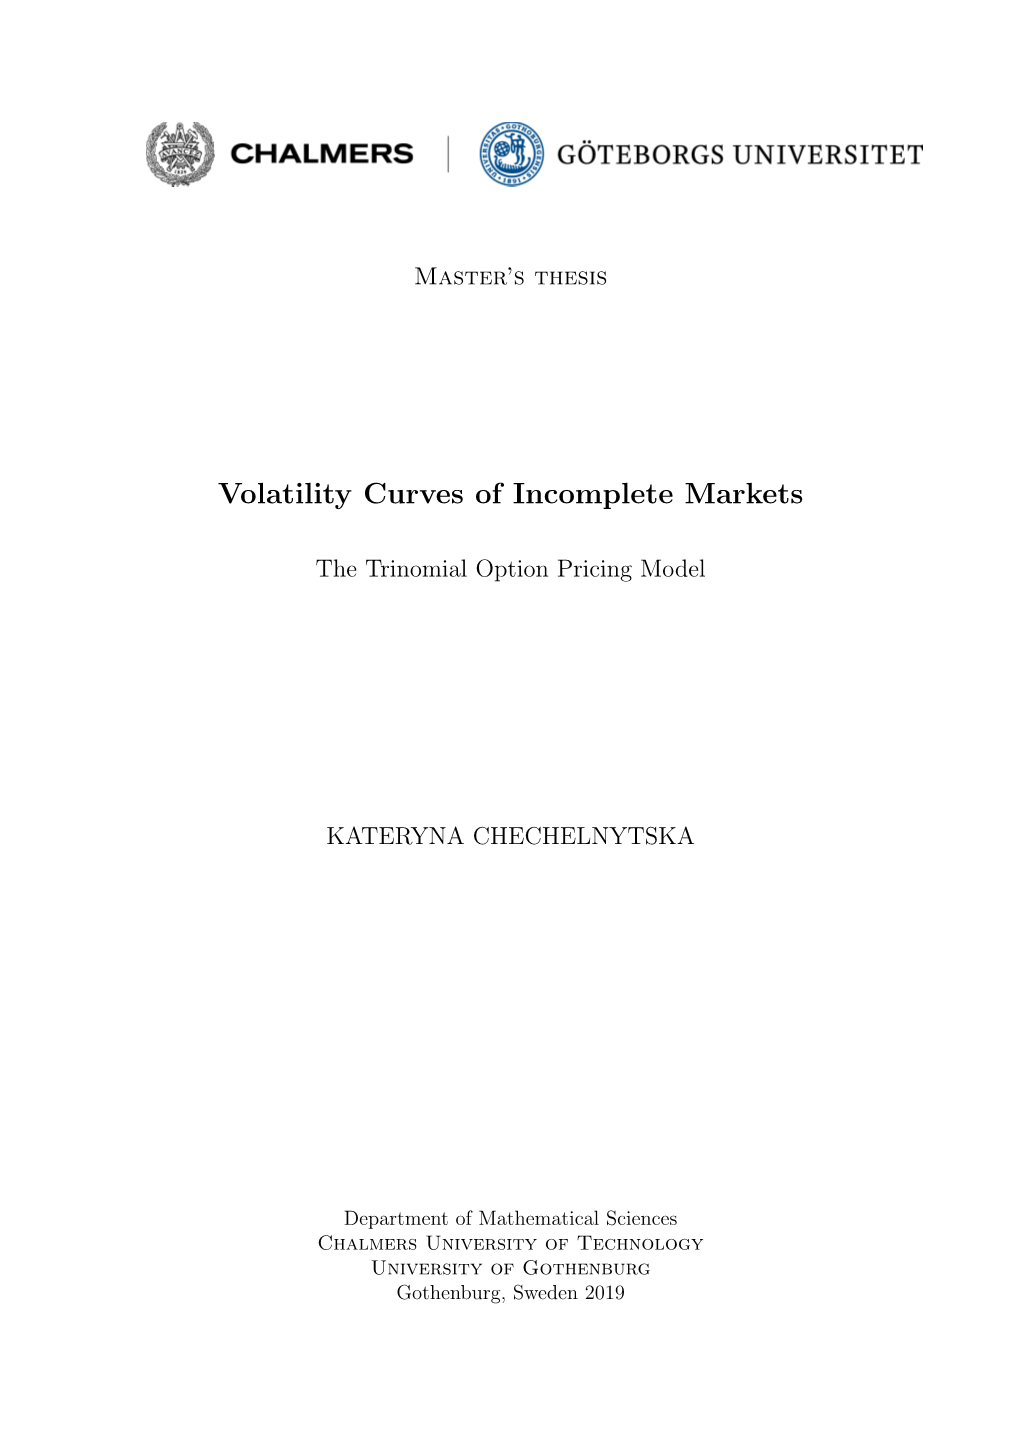 Volatility Curves of Incomplete Markets